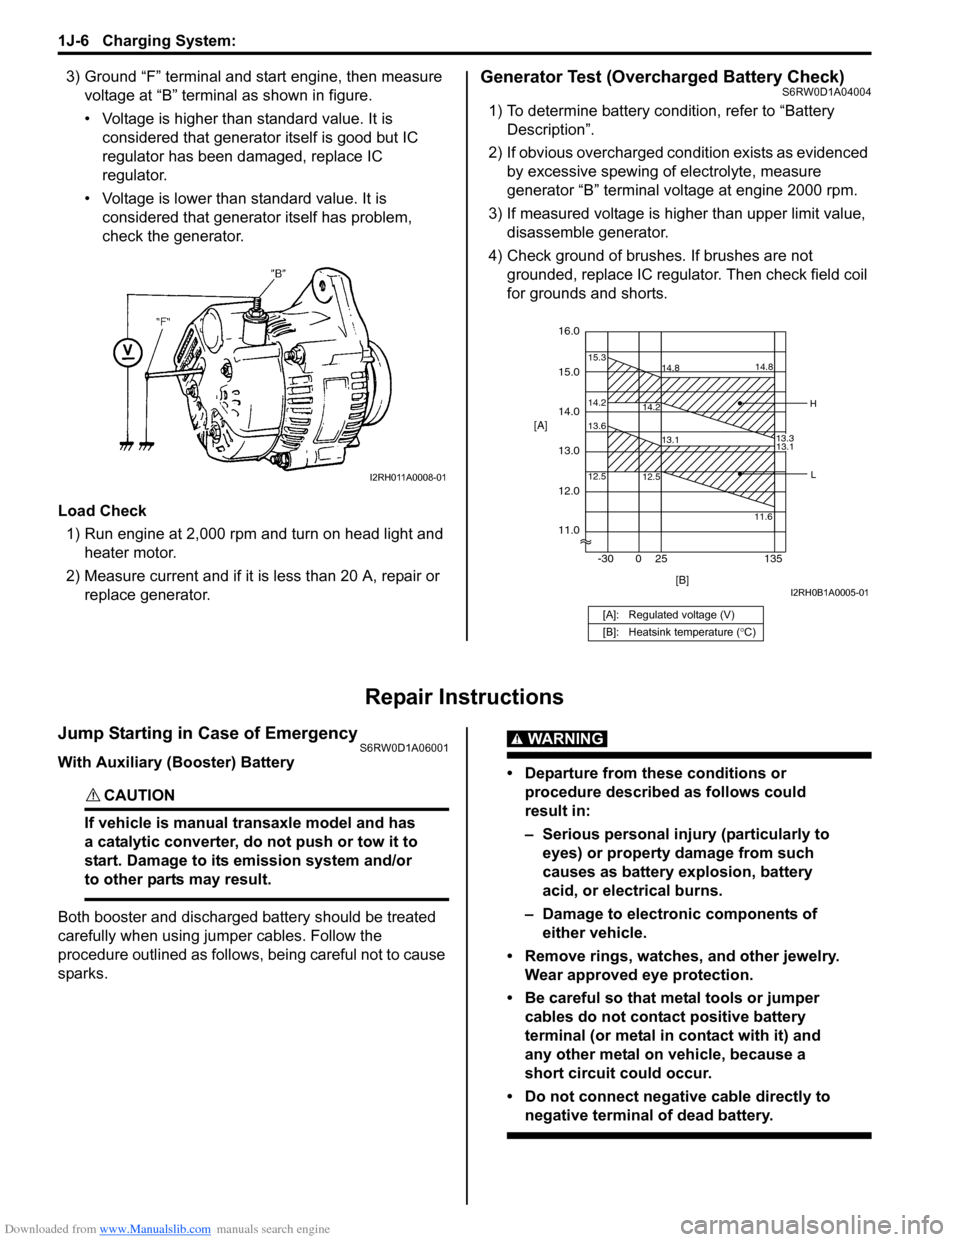 SUZUKI SX4 2006 1.G Service Workshop Manual Downloaded from www.Manualslib.com manuals search engine 1J-6 Charging System: 
3) Ground “F” terminal and start engine, then measure 
voltage at “B” terminal as shown in figure.
• Voltage i